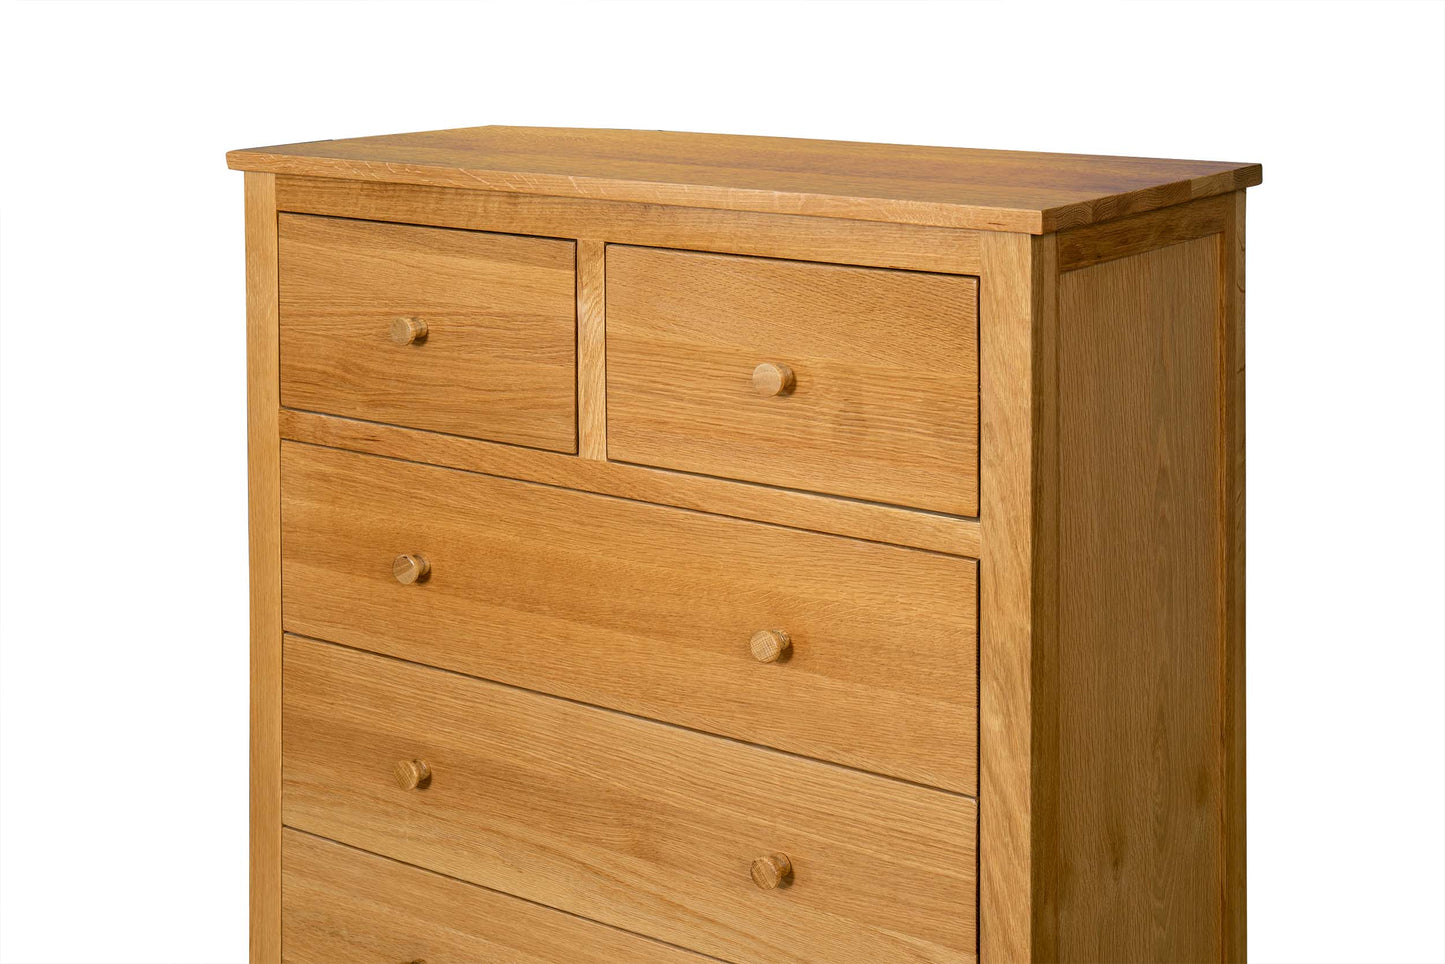 2 Over 3 Drawer Chest of Drawers - Standard Style - Natural Oak